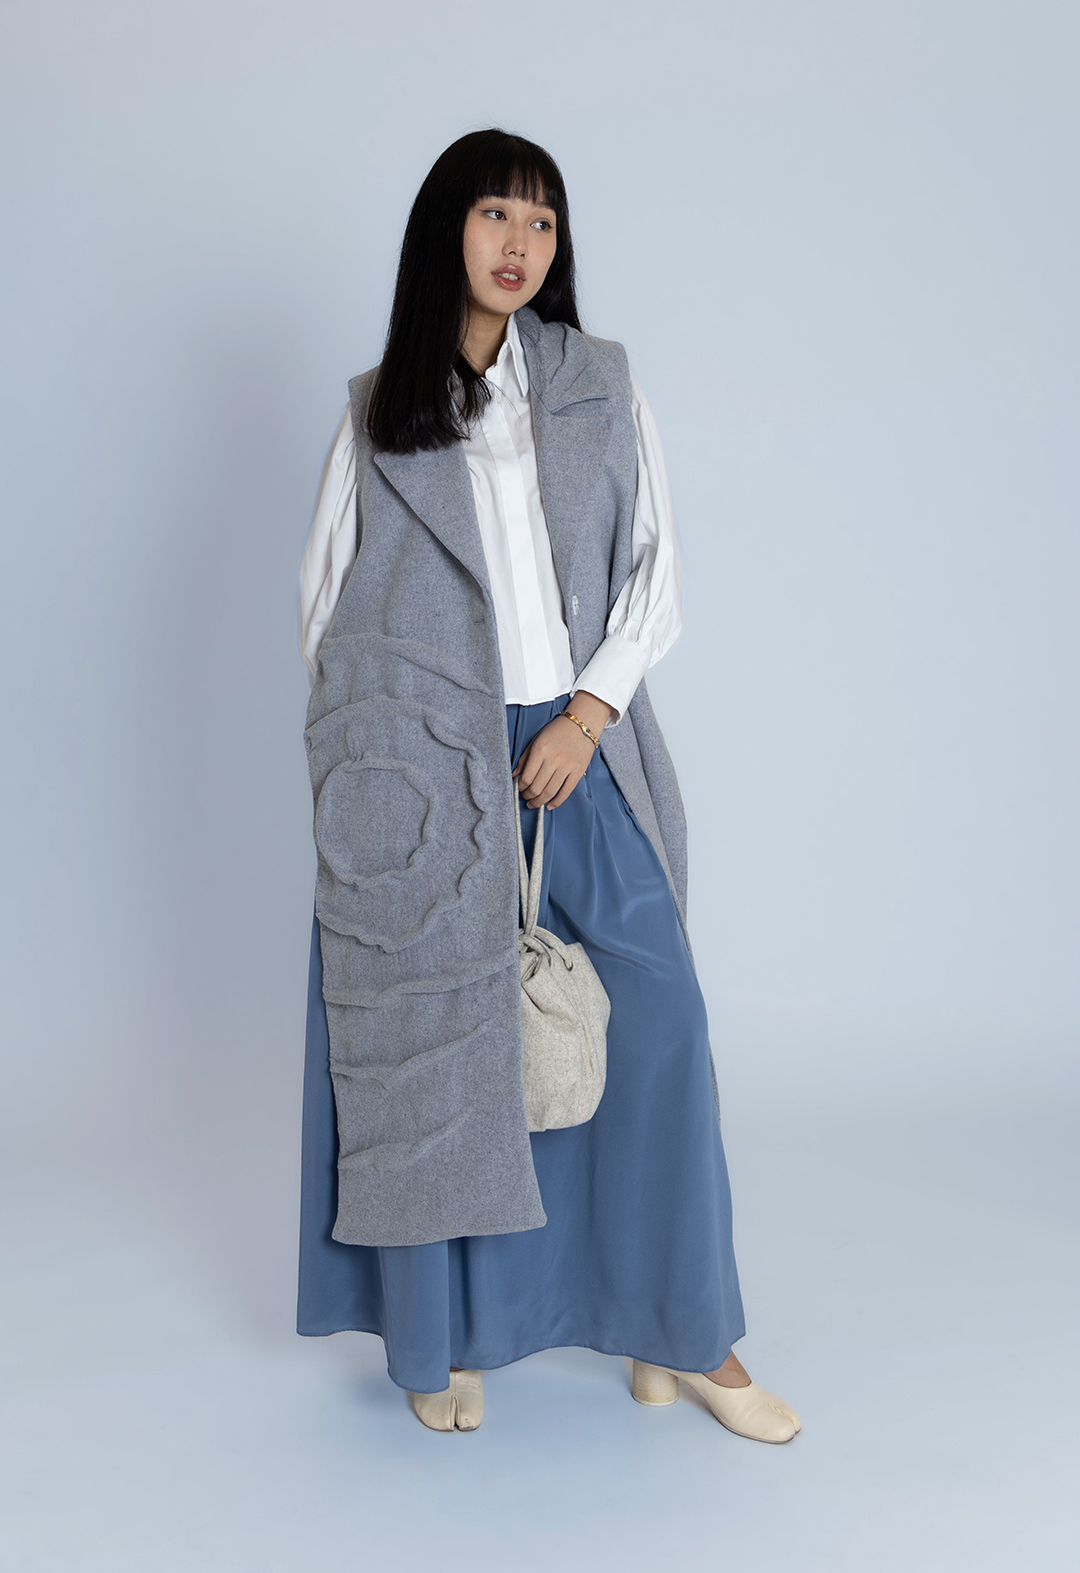 A model presents the front view of a long vest with a ripple texture, layered over a white cotton shirt and blue silk skirt, accompanied by a light-gray pouch bag.